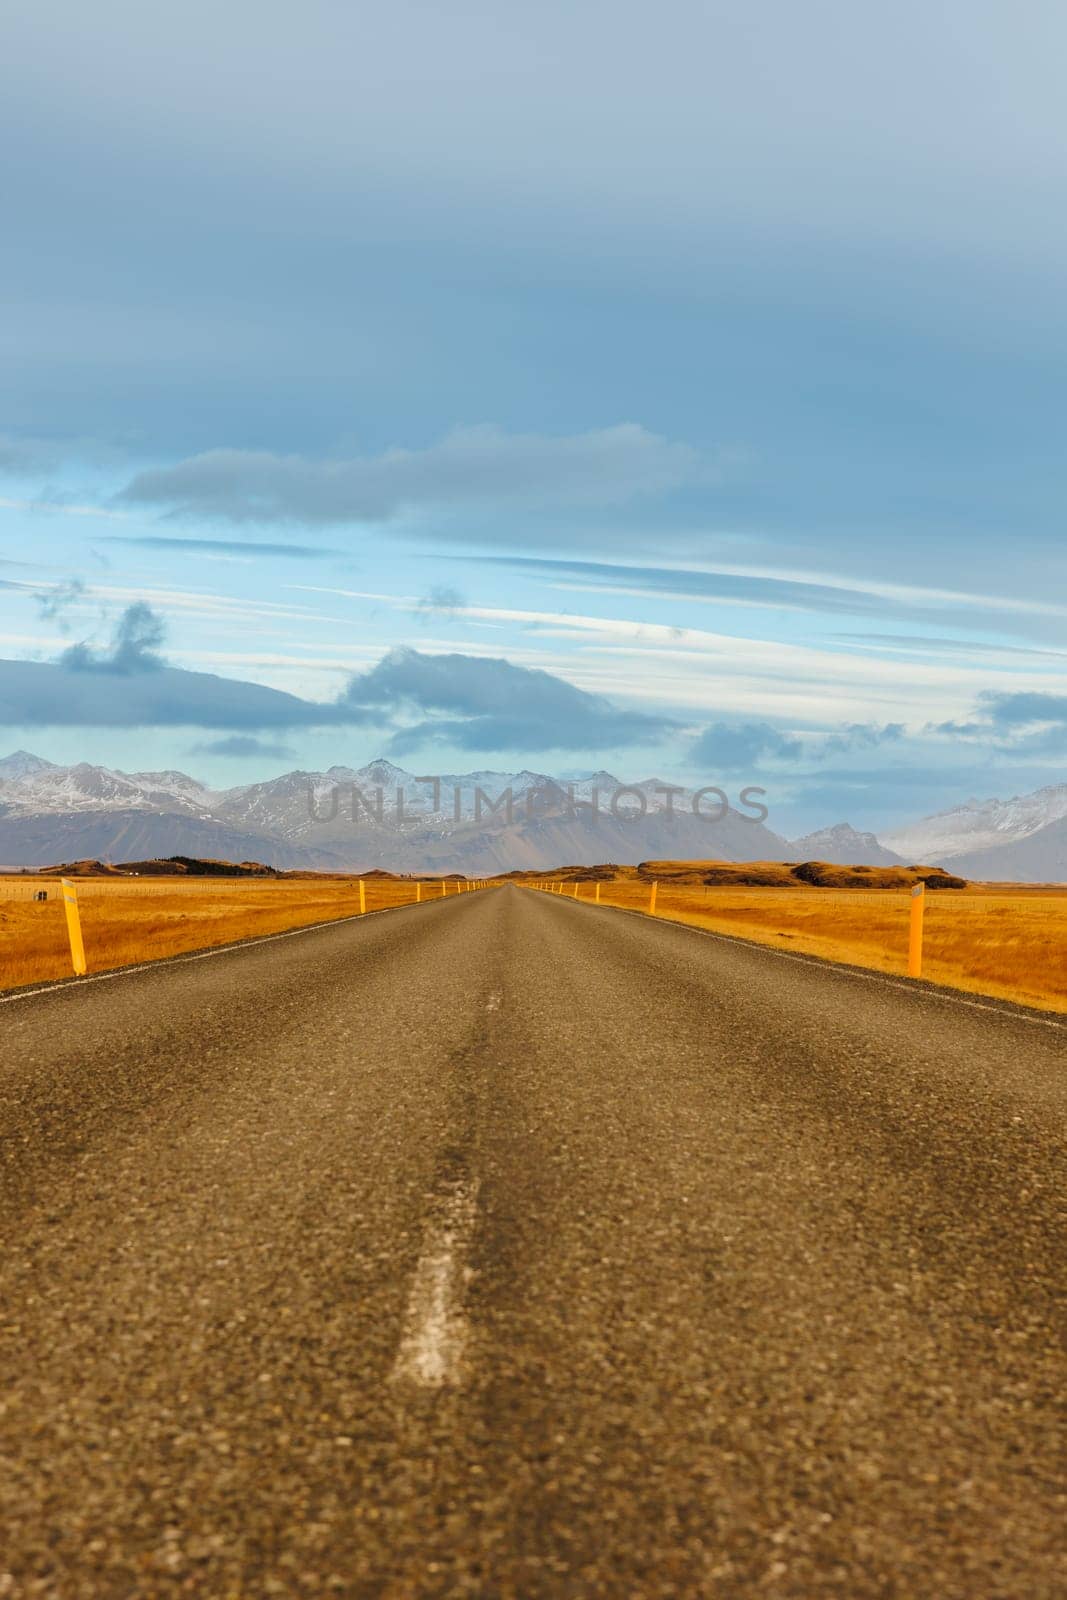 Lonely road in icelandic landscape with snow covered mountains and frosty fields, countryside highway. Spectacular long road in iceland with scandinavian hills and nordic nature.